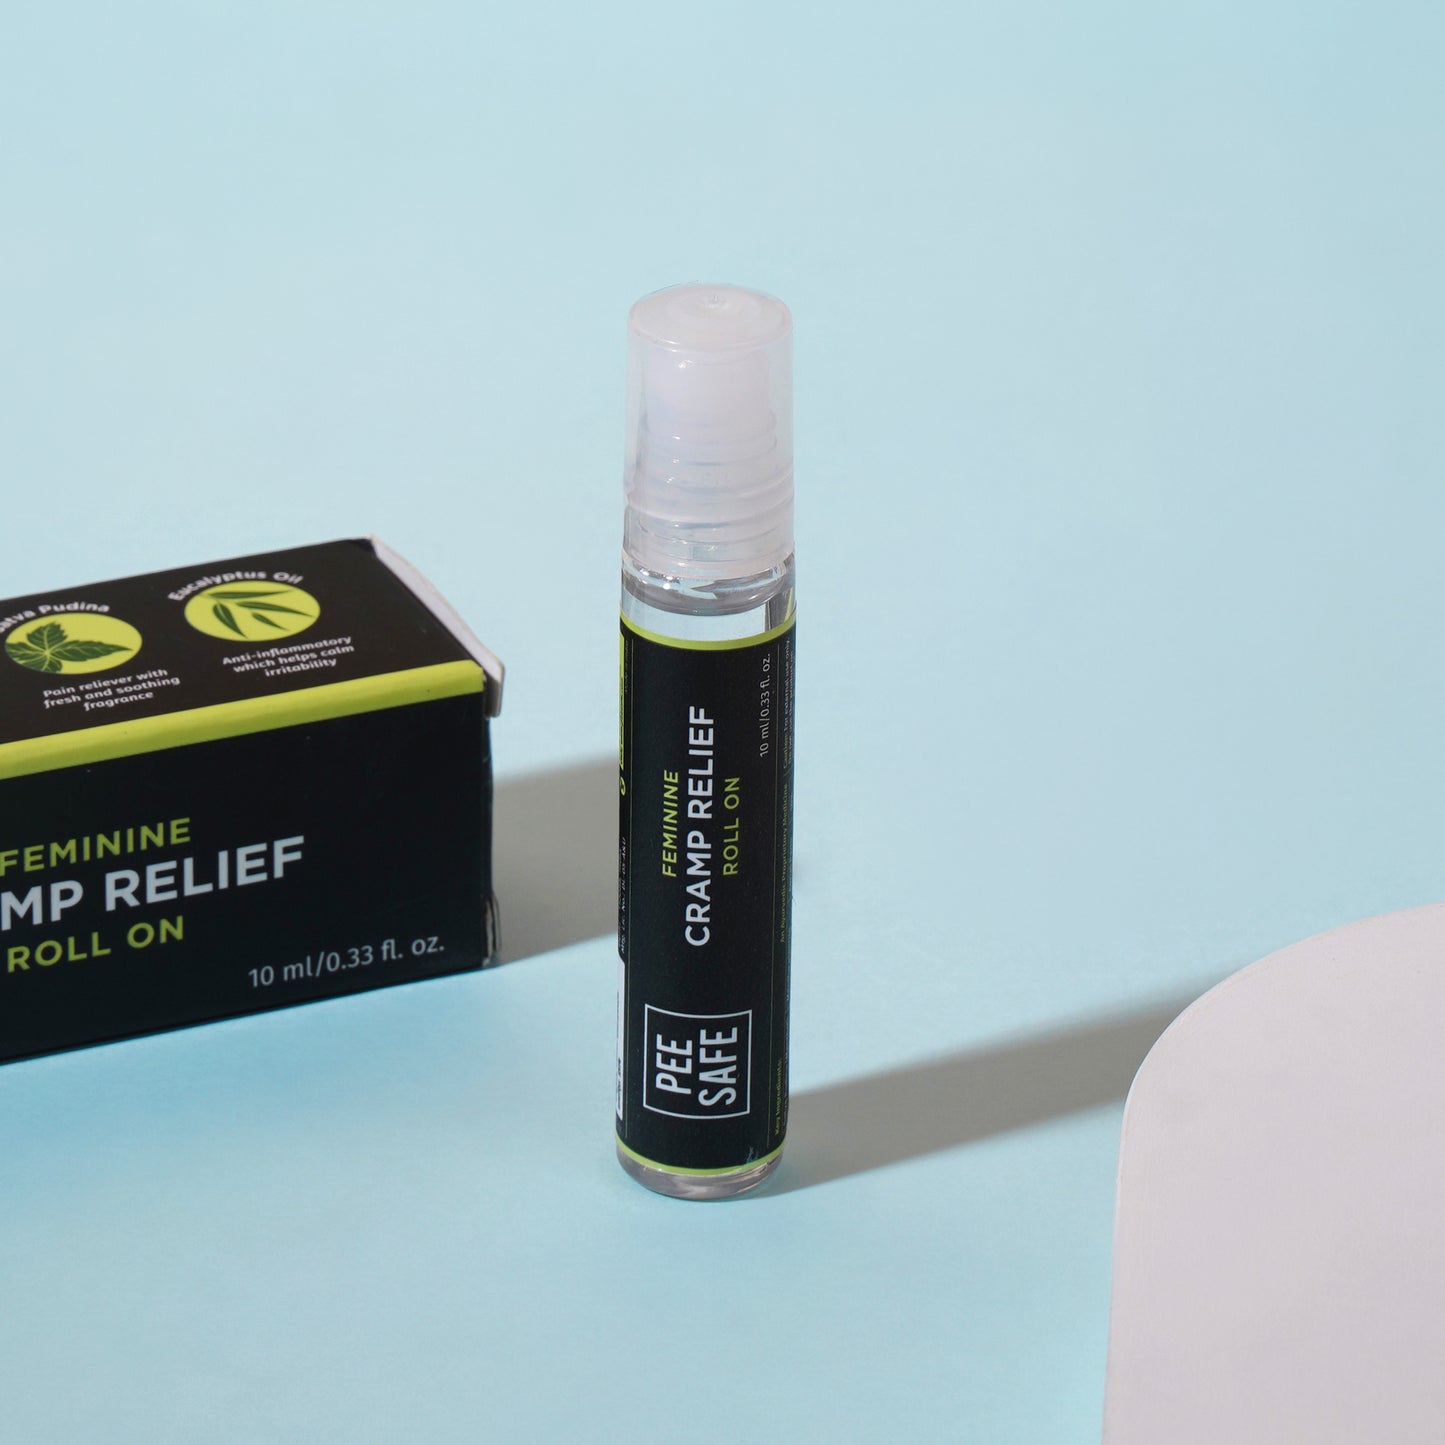 Cramp relief from Pee Safe